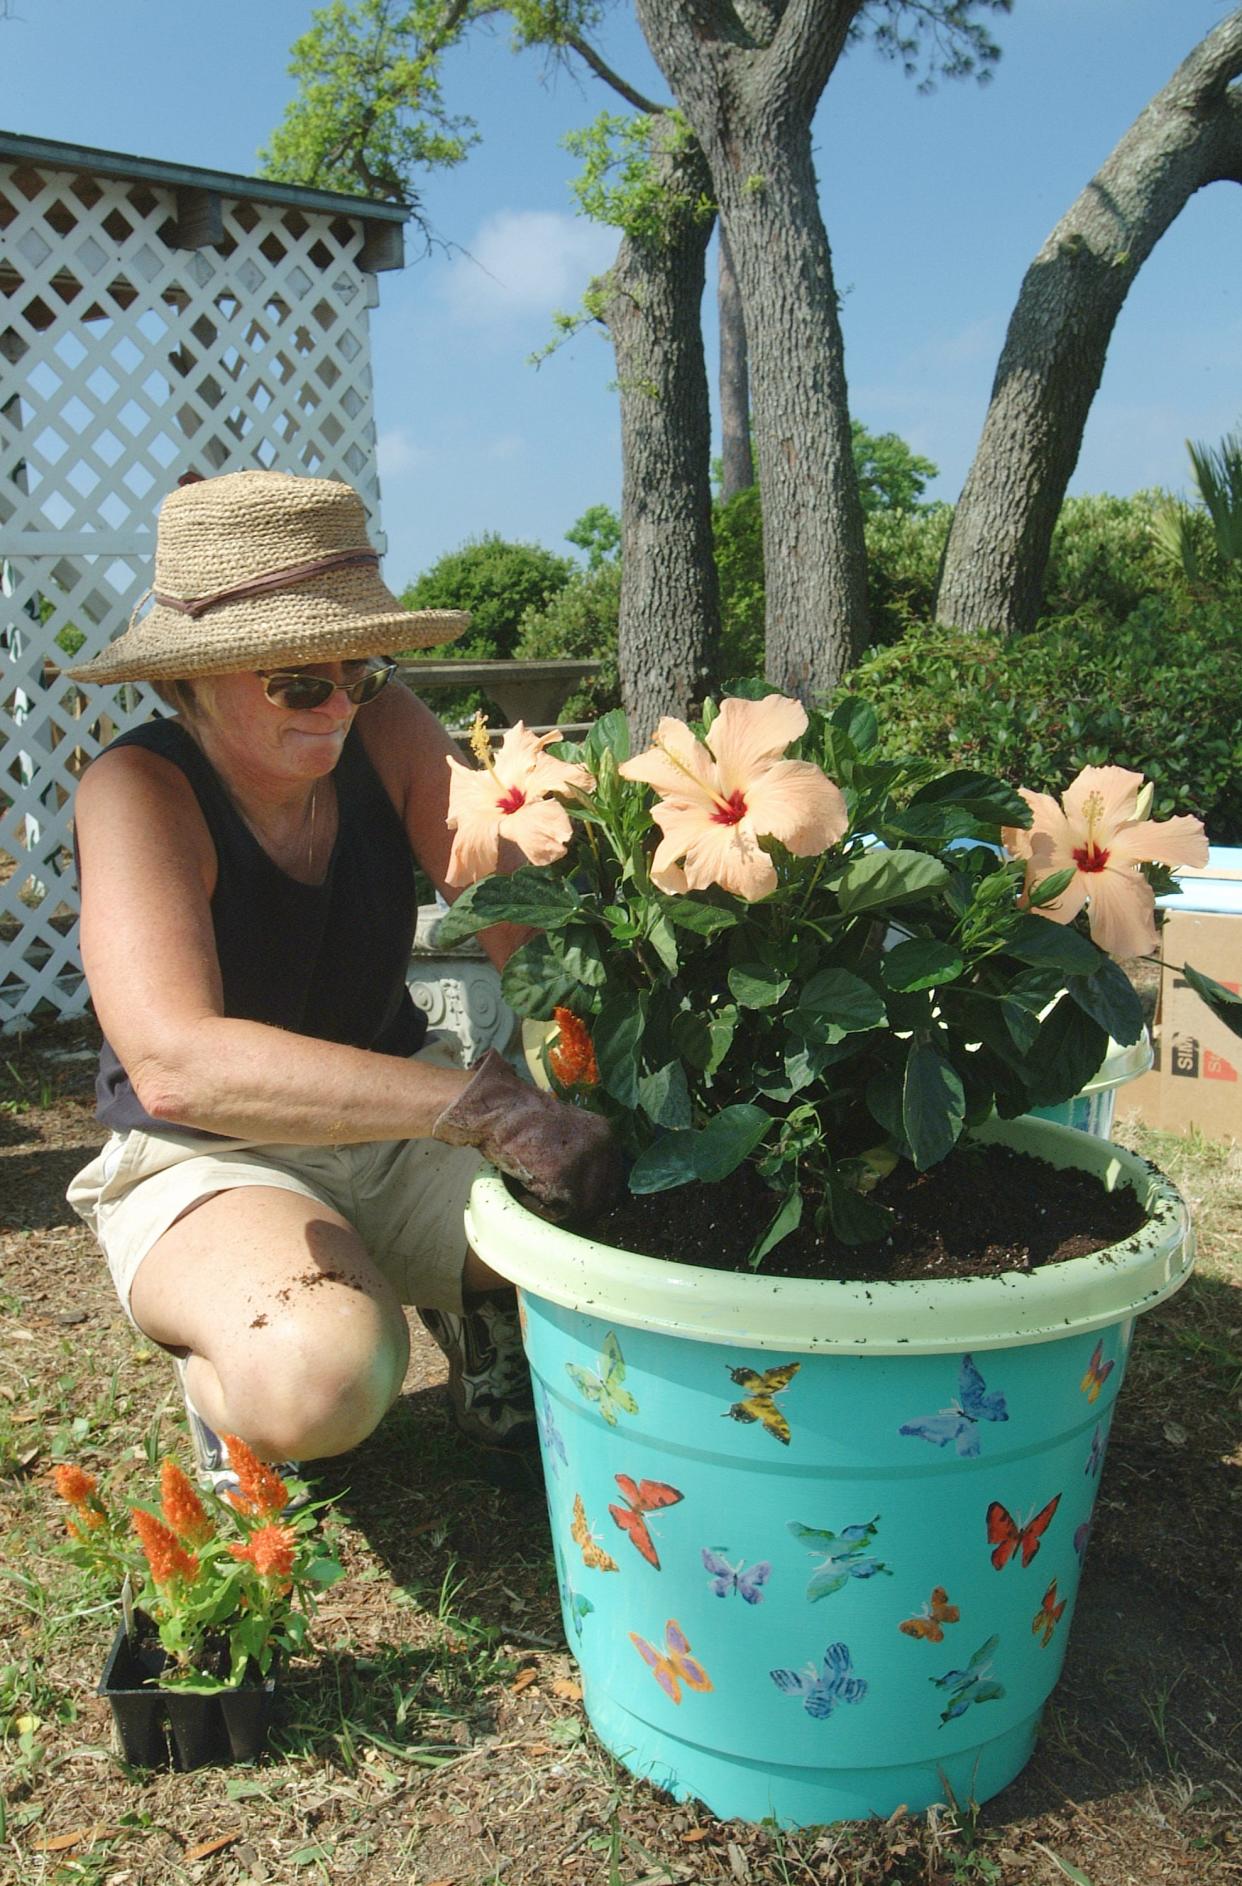 Protect yourself from the sun and heat while gardening outdoors.